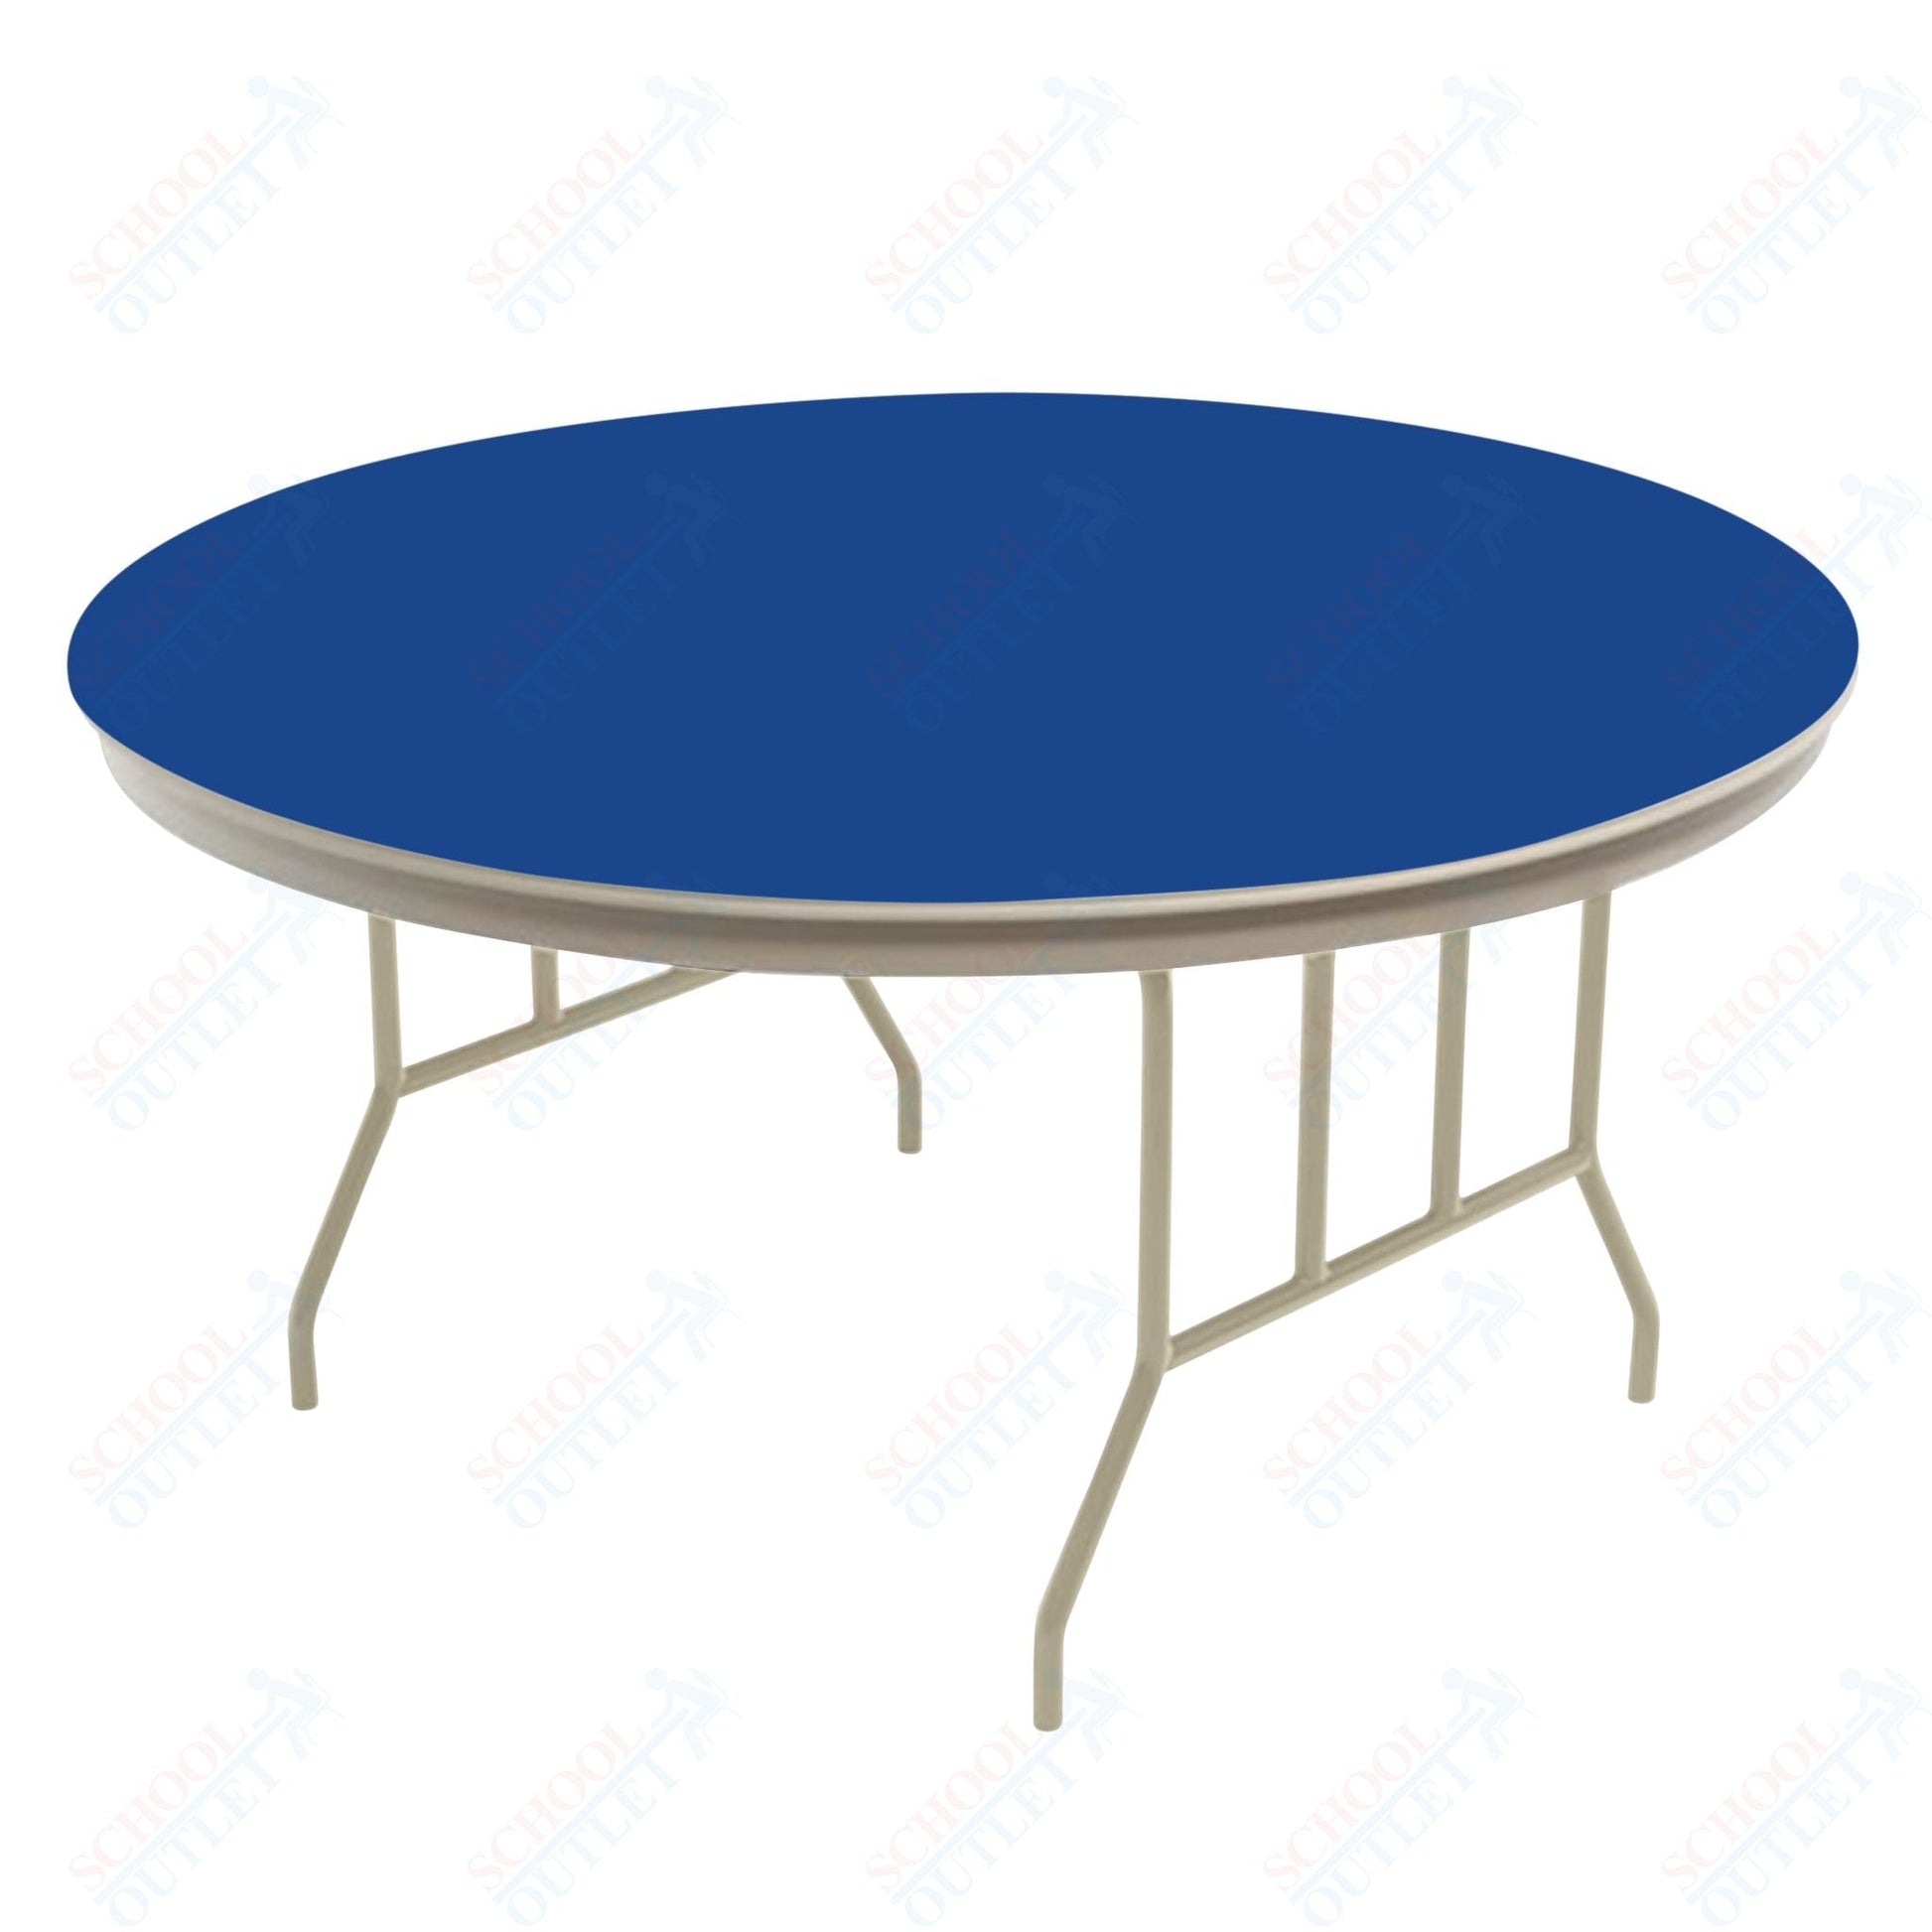 AmTab Dynalite Featherweight Heavy - Duty ABS Plastic Folding Table - Round - 72" Diameter x 29"H (AmTab AMT - R72DL) - SchoolOutlet